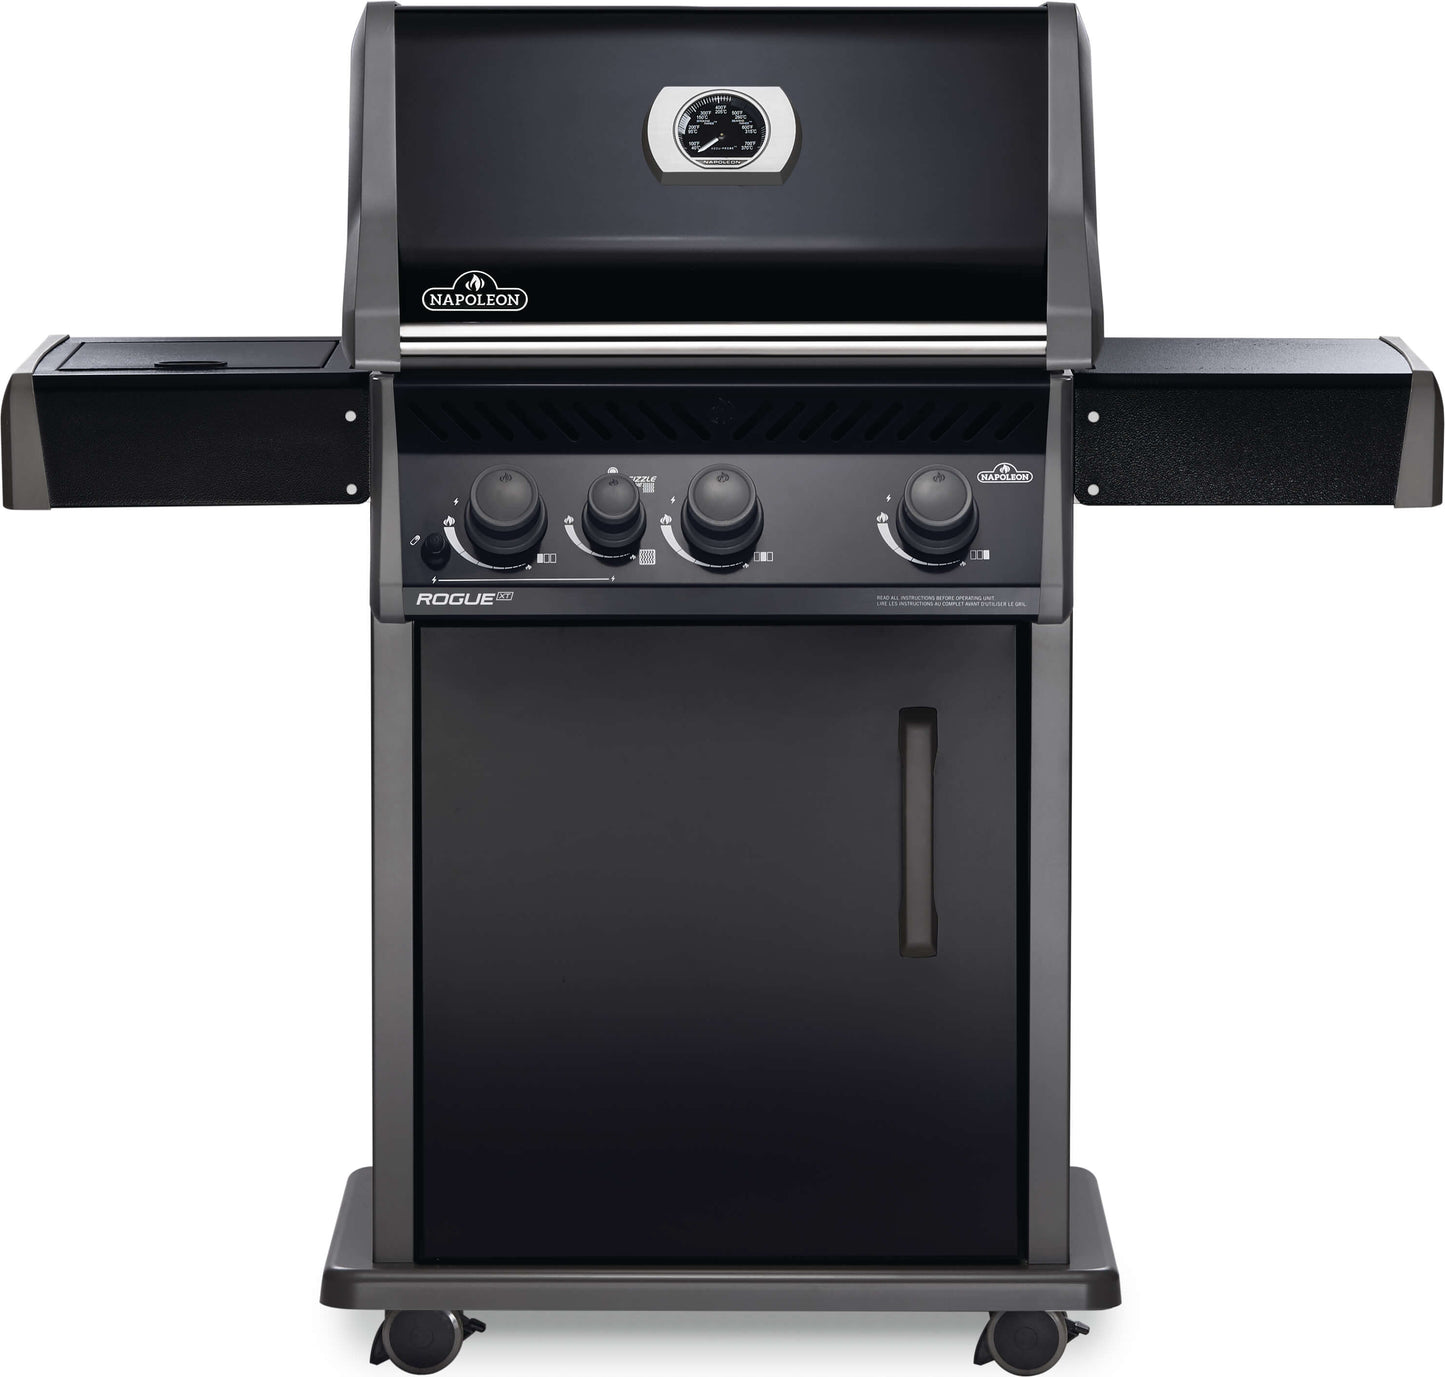 Rogue® XT 425 Grill with Infrared Side Burner